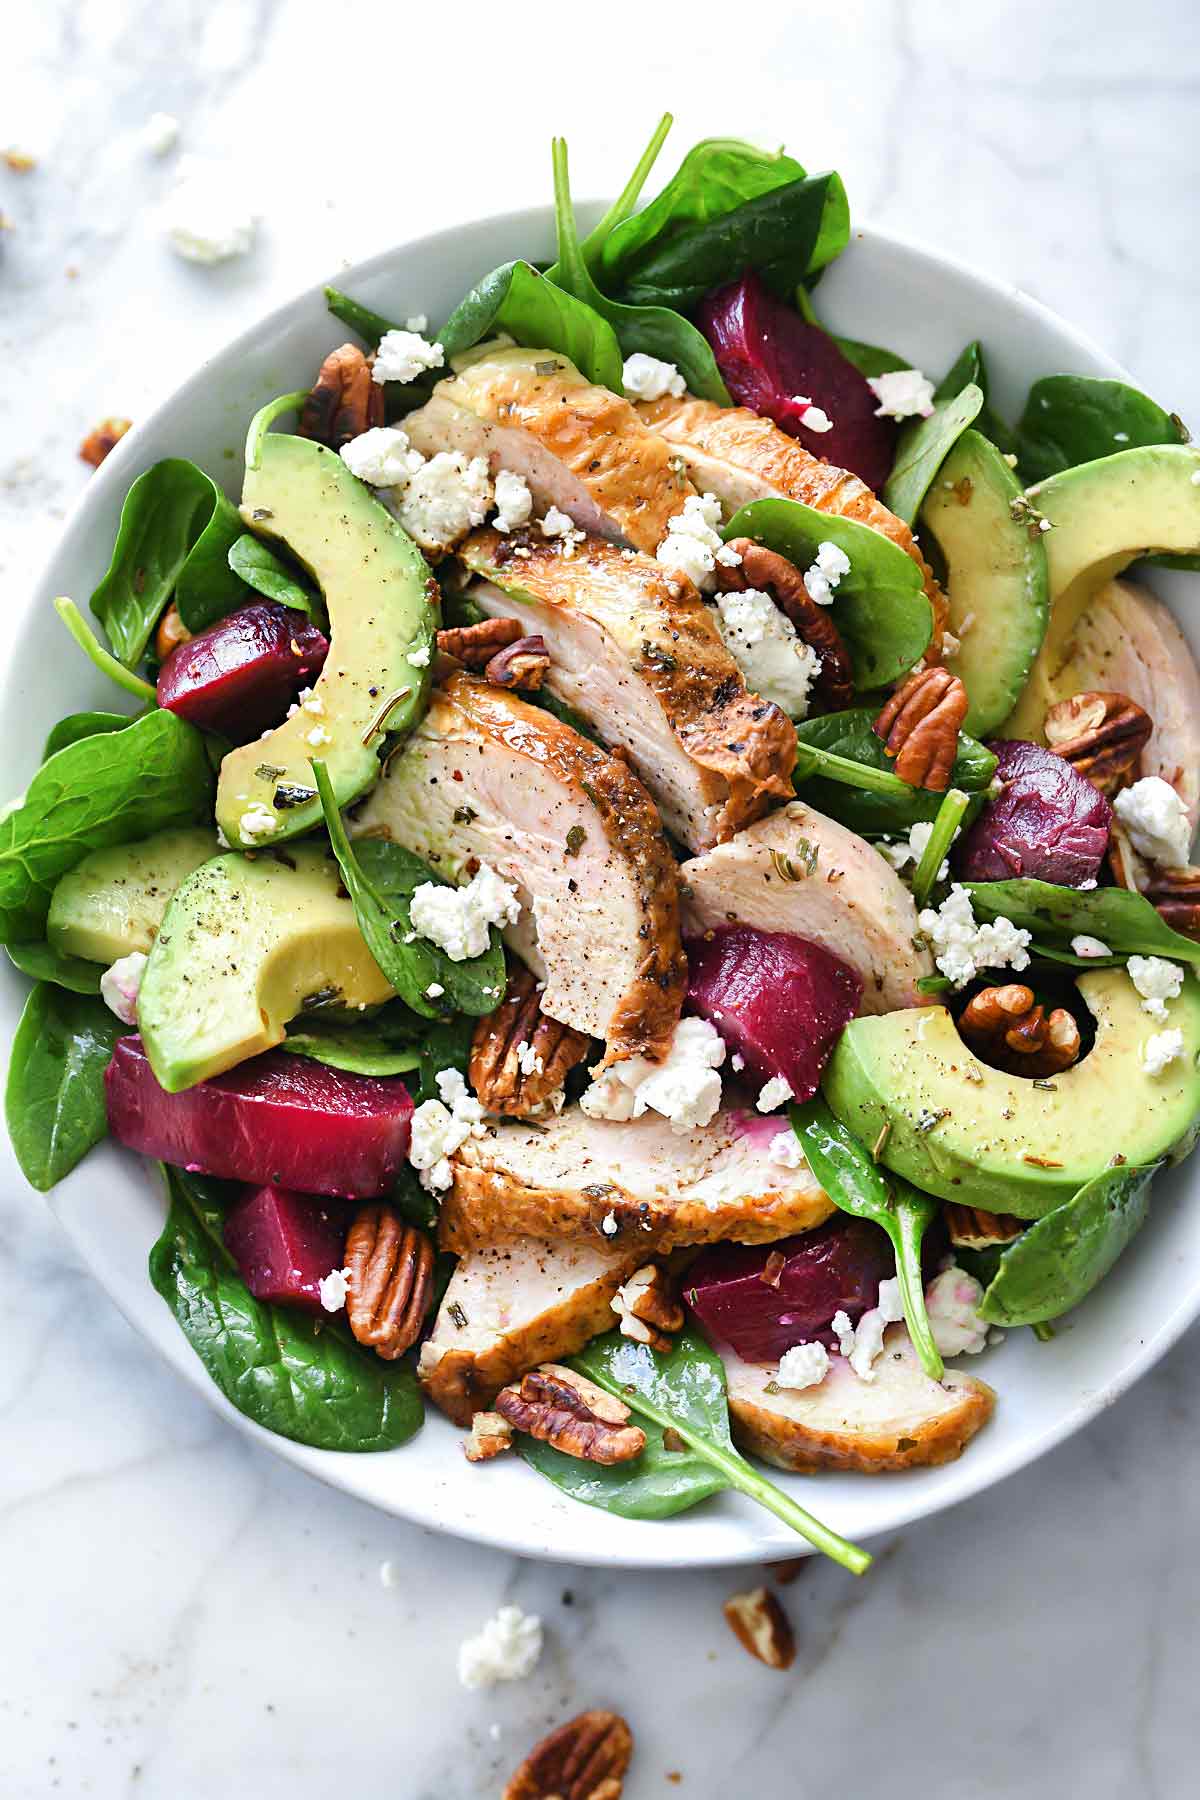 Spinach Salad with Beets, Chicken and Goat Cheese | foodiecrush.com